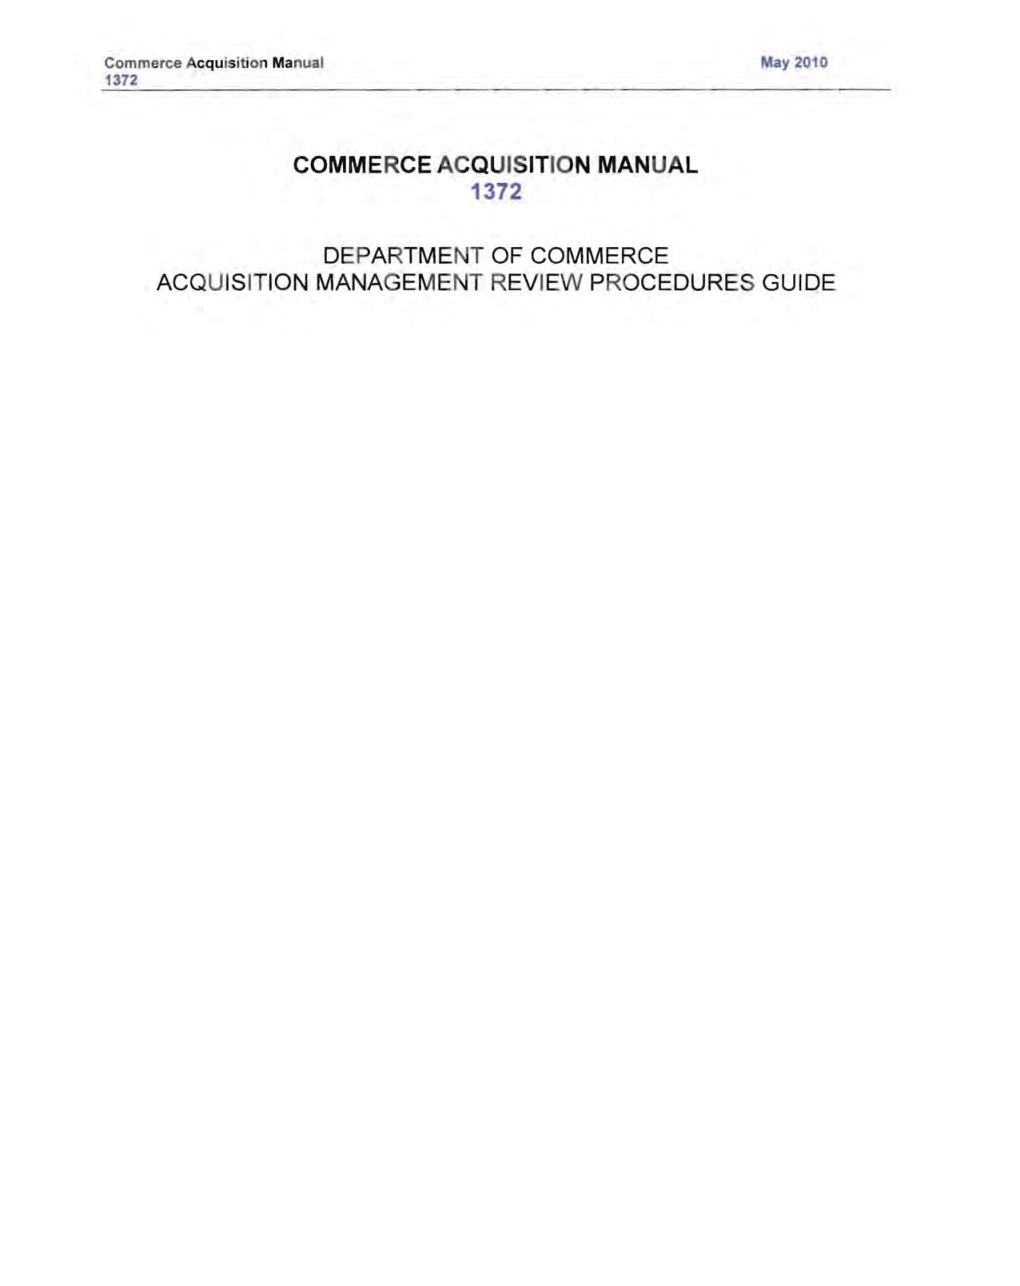 ACQUISITION MANAGEMENT REVIEW PROCEDURES GUIDE Commerce Acquisition Manual May 2010 1372